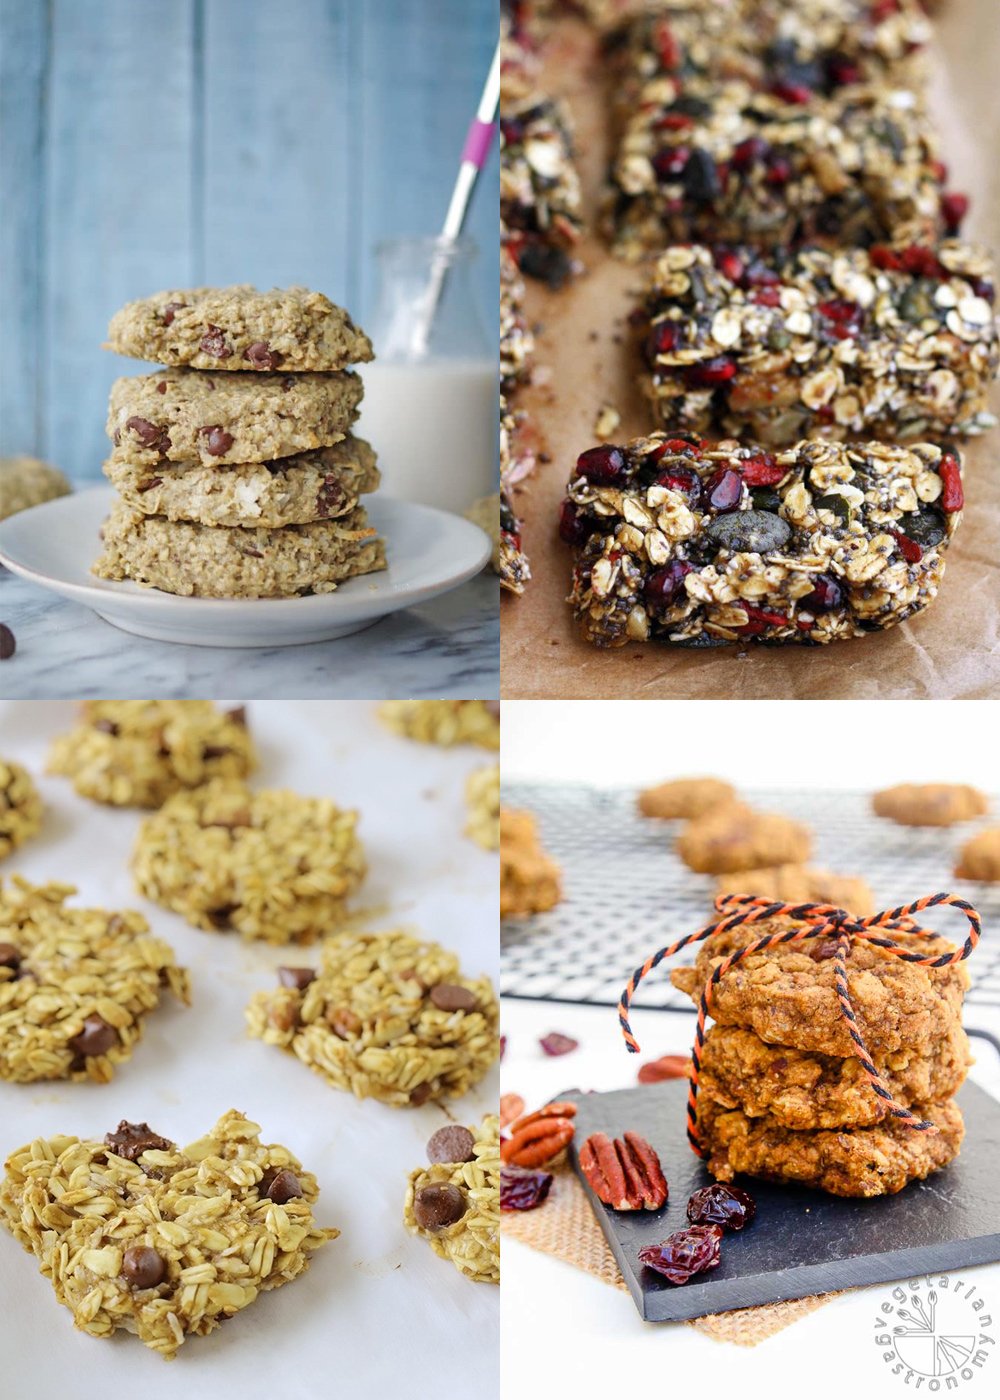 75+ Best Make-Ahead Oatmeal Recipes to Eat for Breakfast